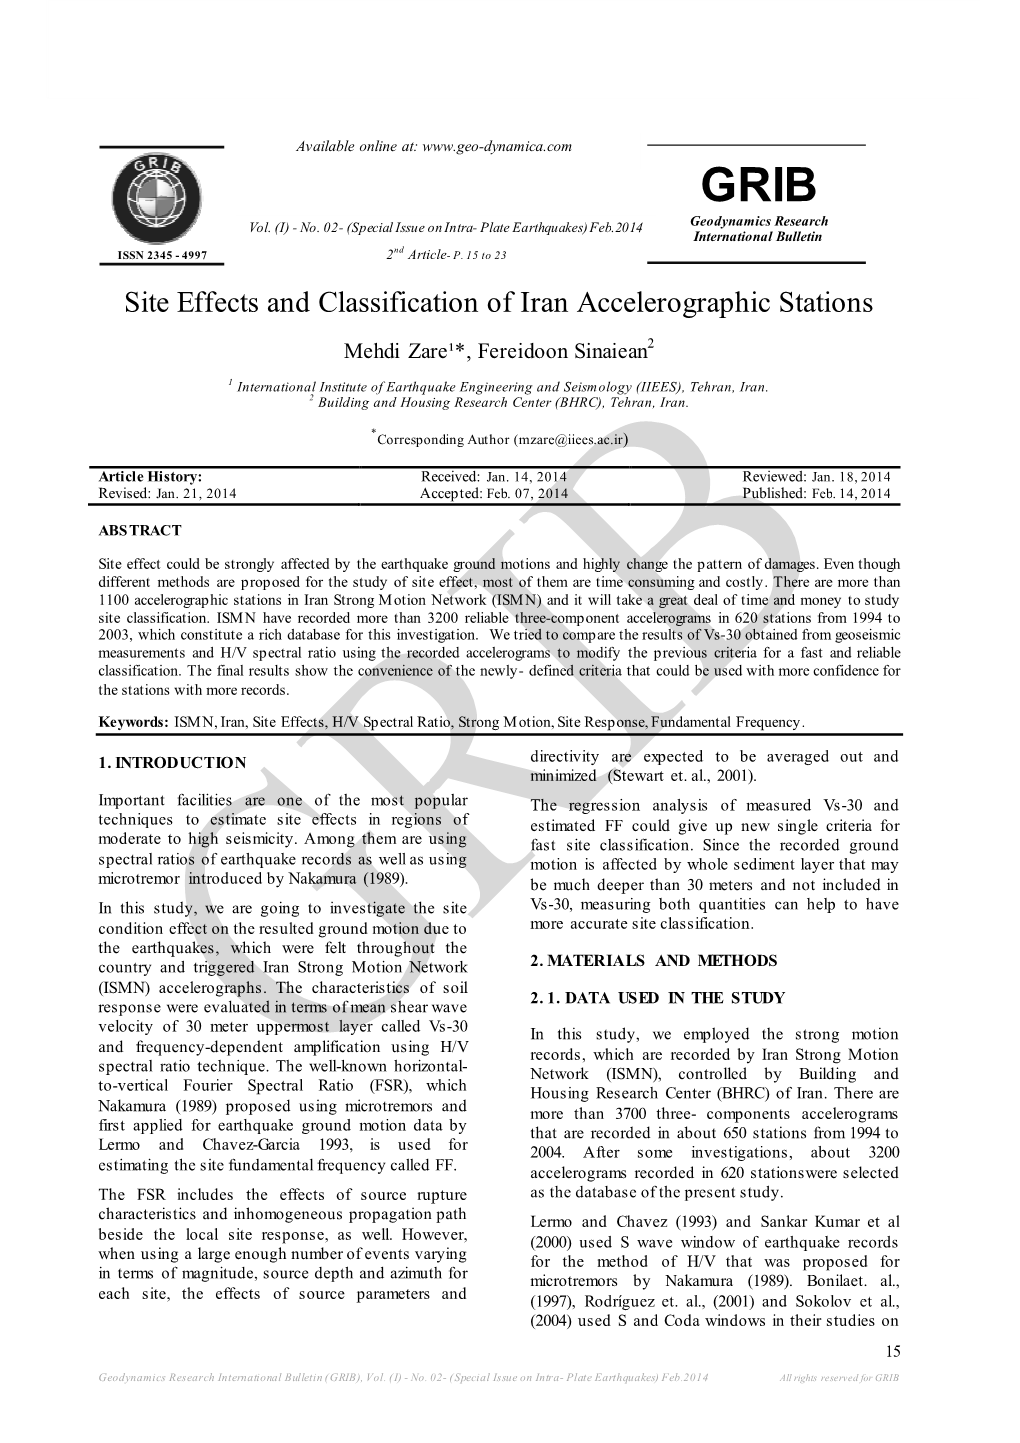 Site Effects and Classification of Iran Accelerographic Stations